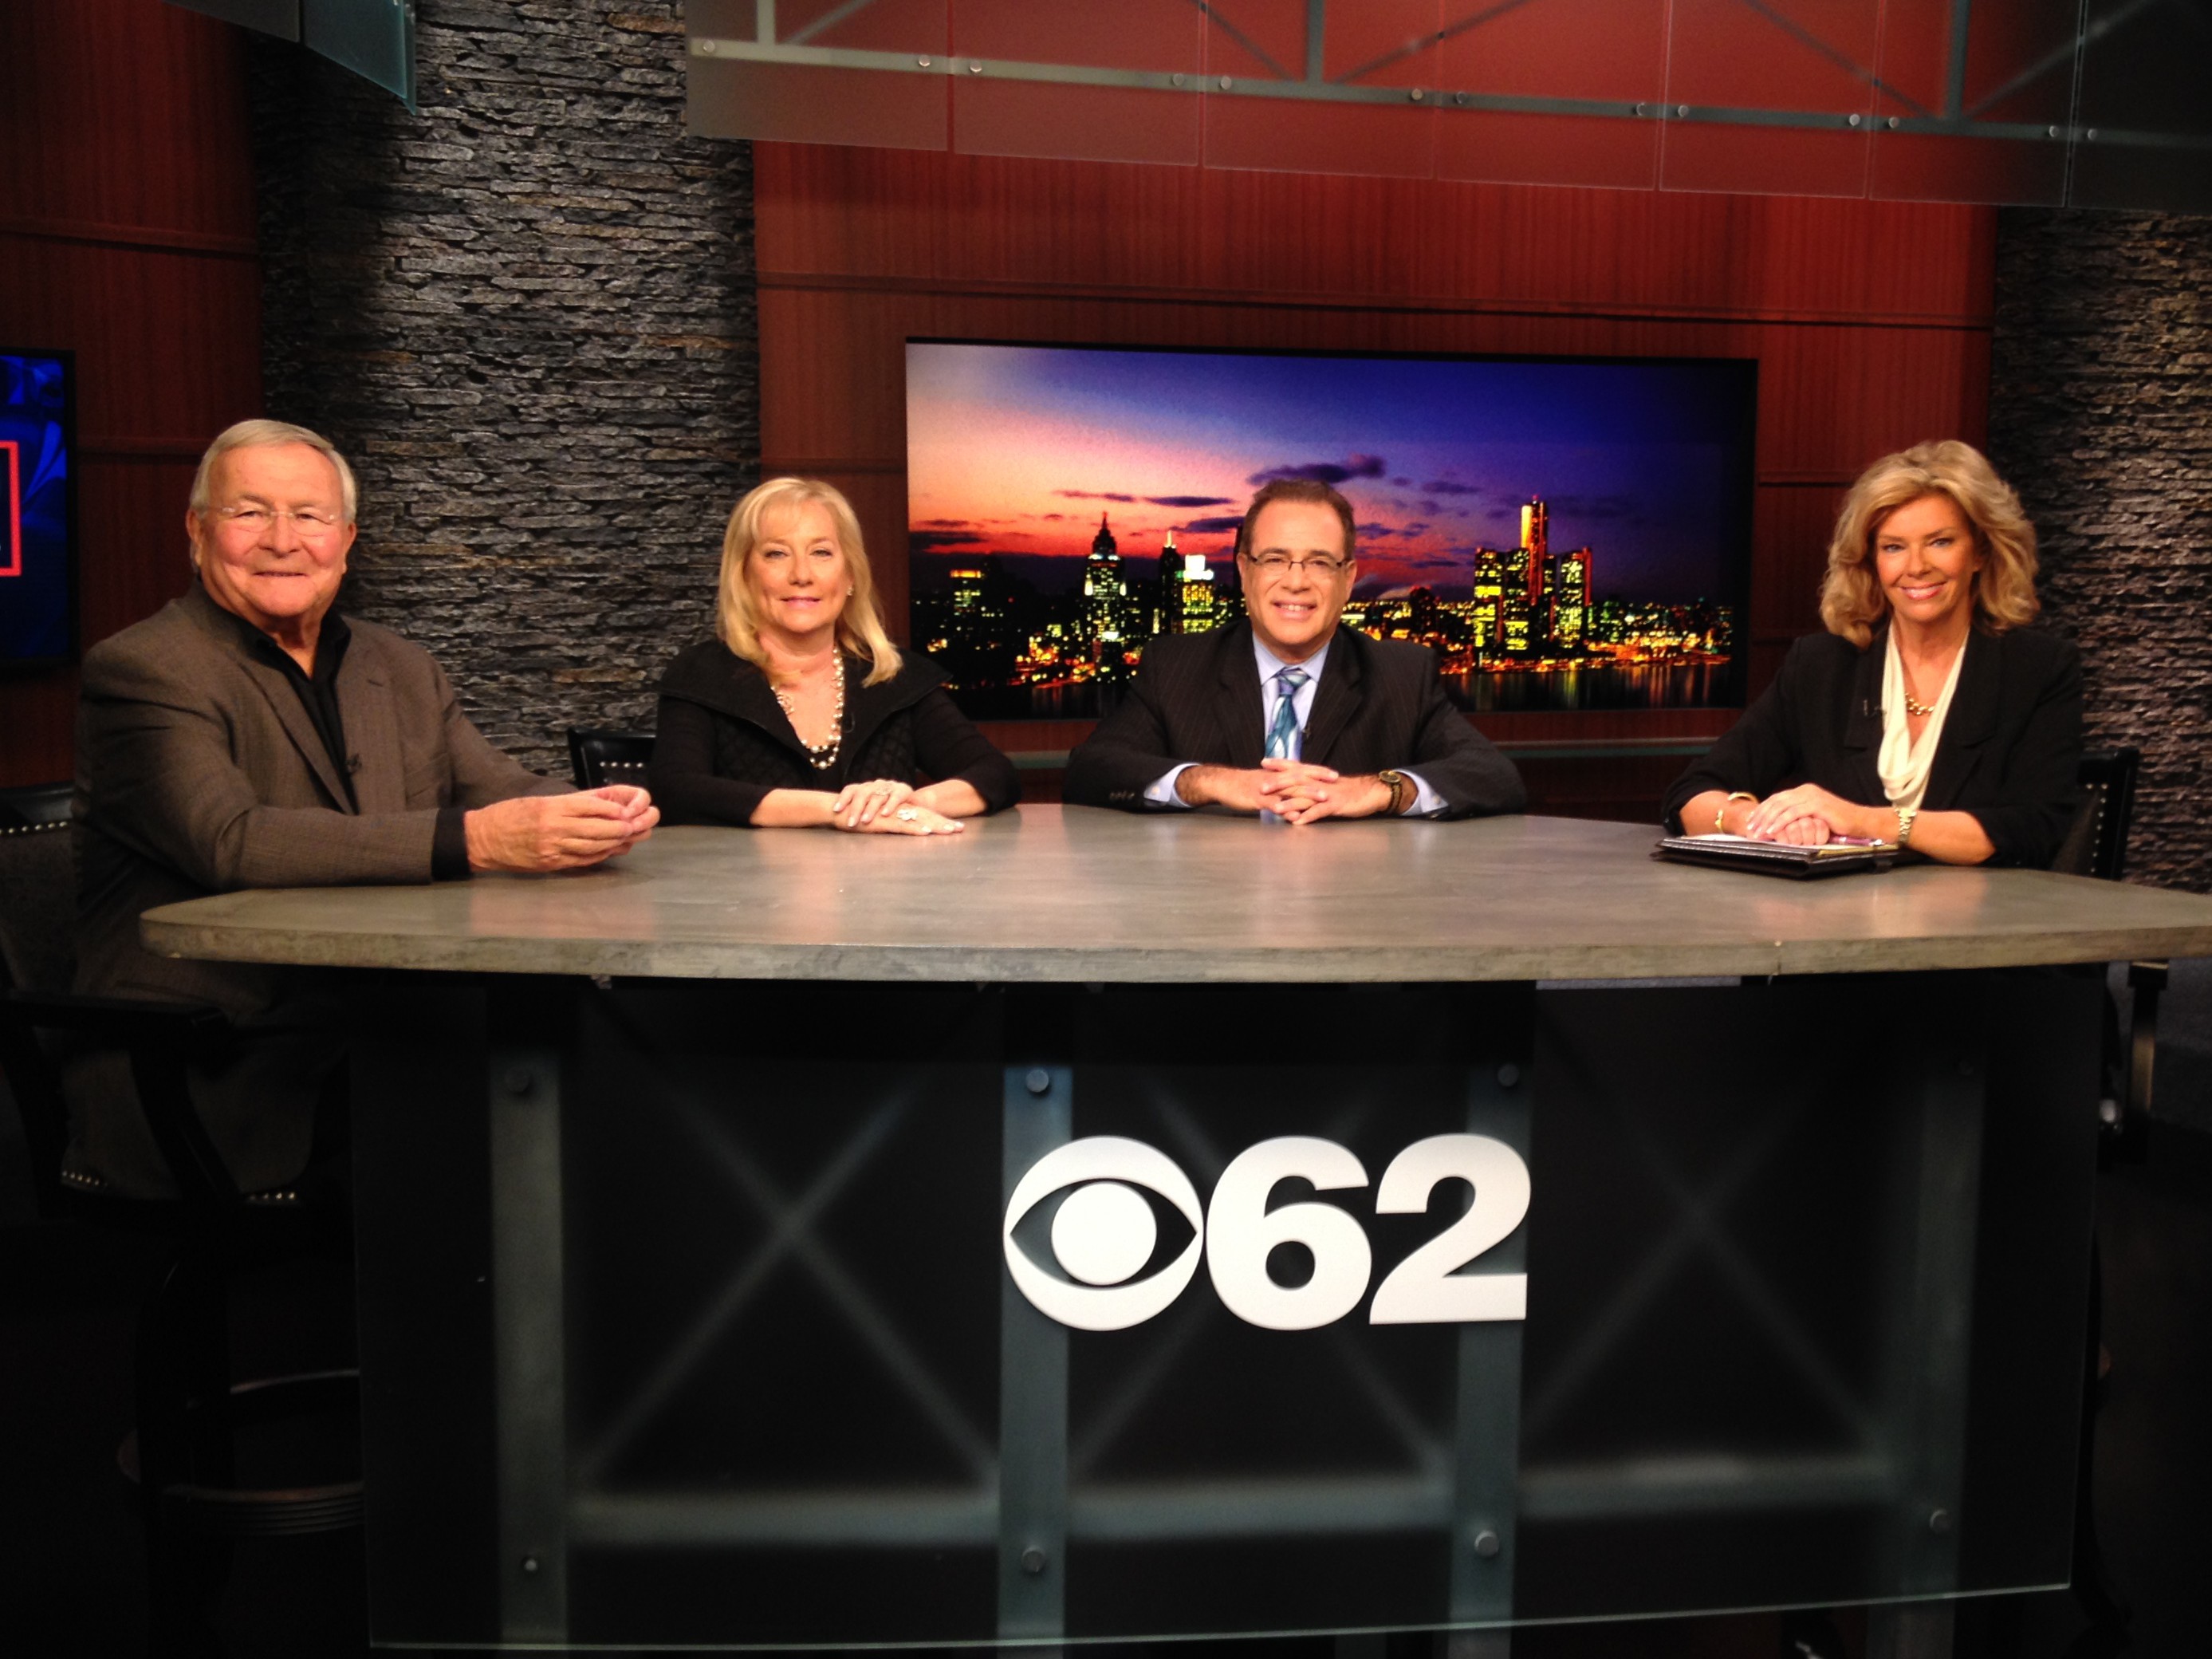 Oakland County Executive L. Brooks Patterson, Denise Ilitch and Wayne County Executive Robert Ficano with  Carol Cain on the "Michigan Matters" set. (credit: James C. Turner/CBS 62)